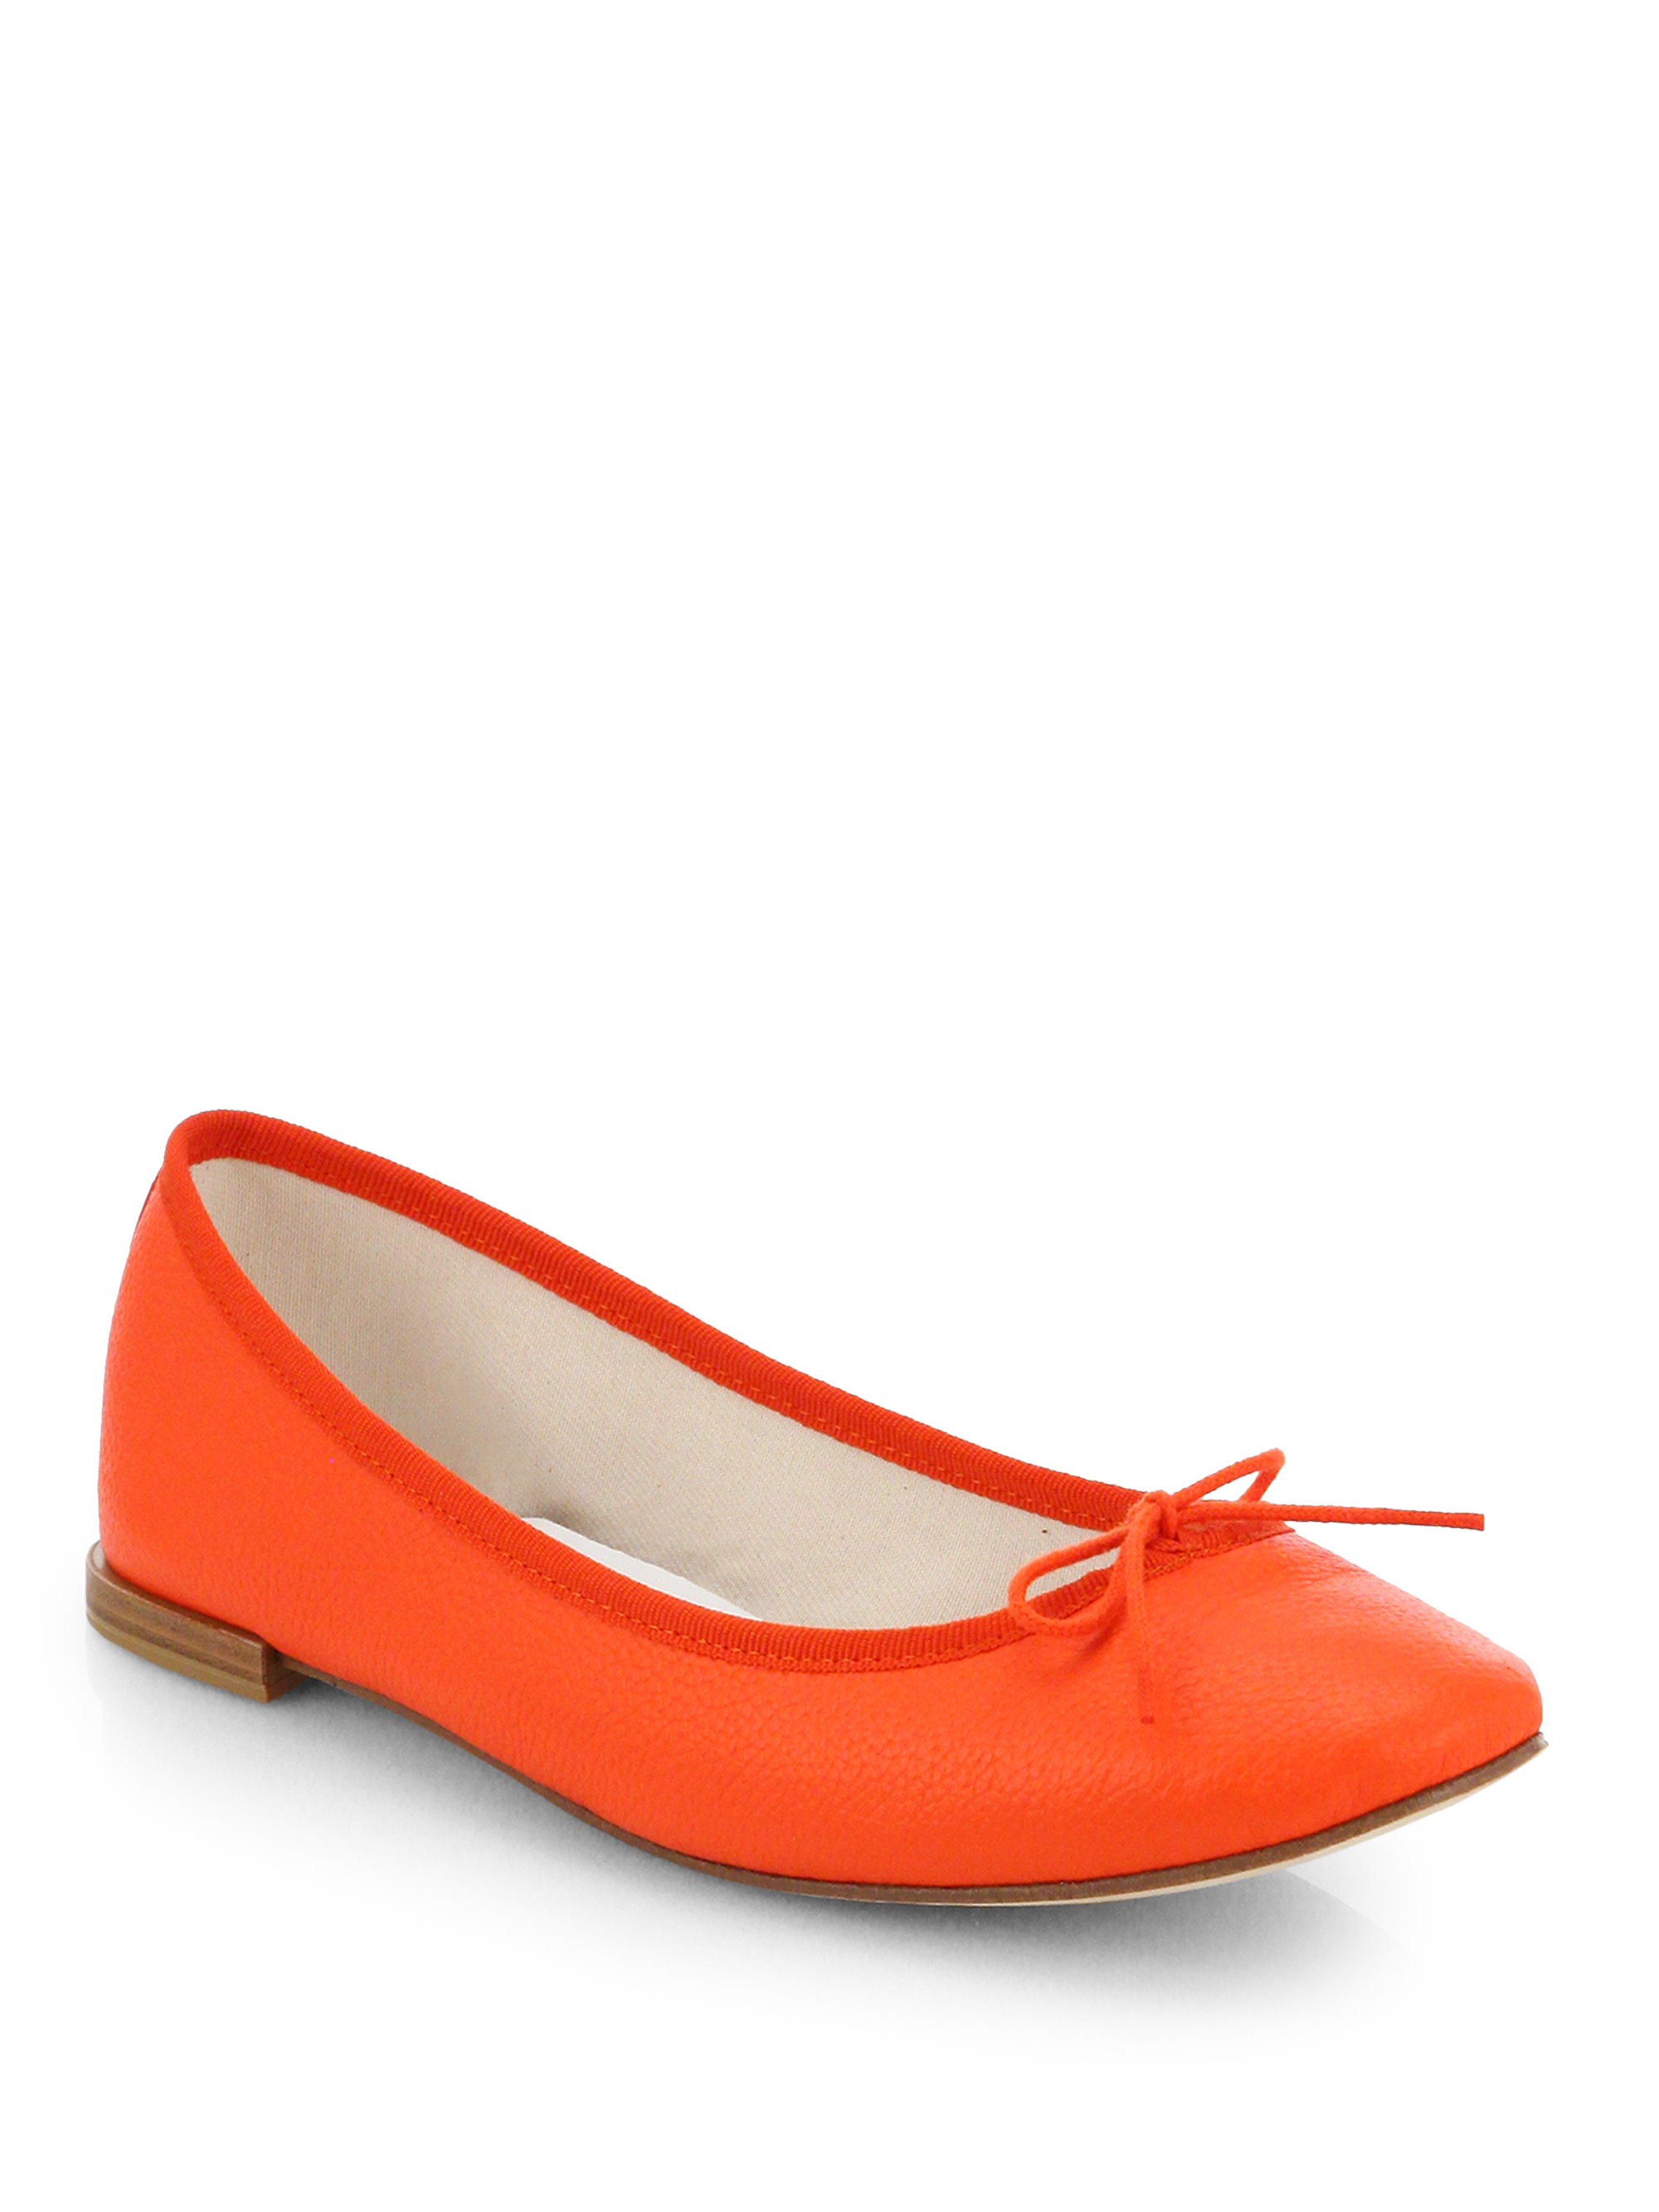 Lyst - Repetto Pebbled Leather Bow Ballet Flats in Orange